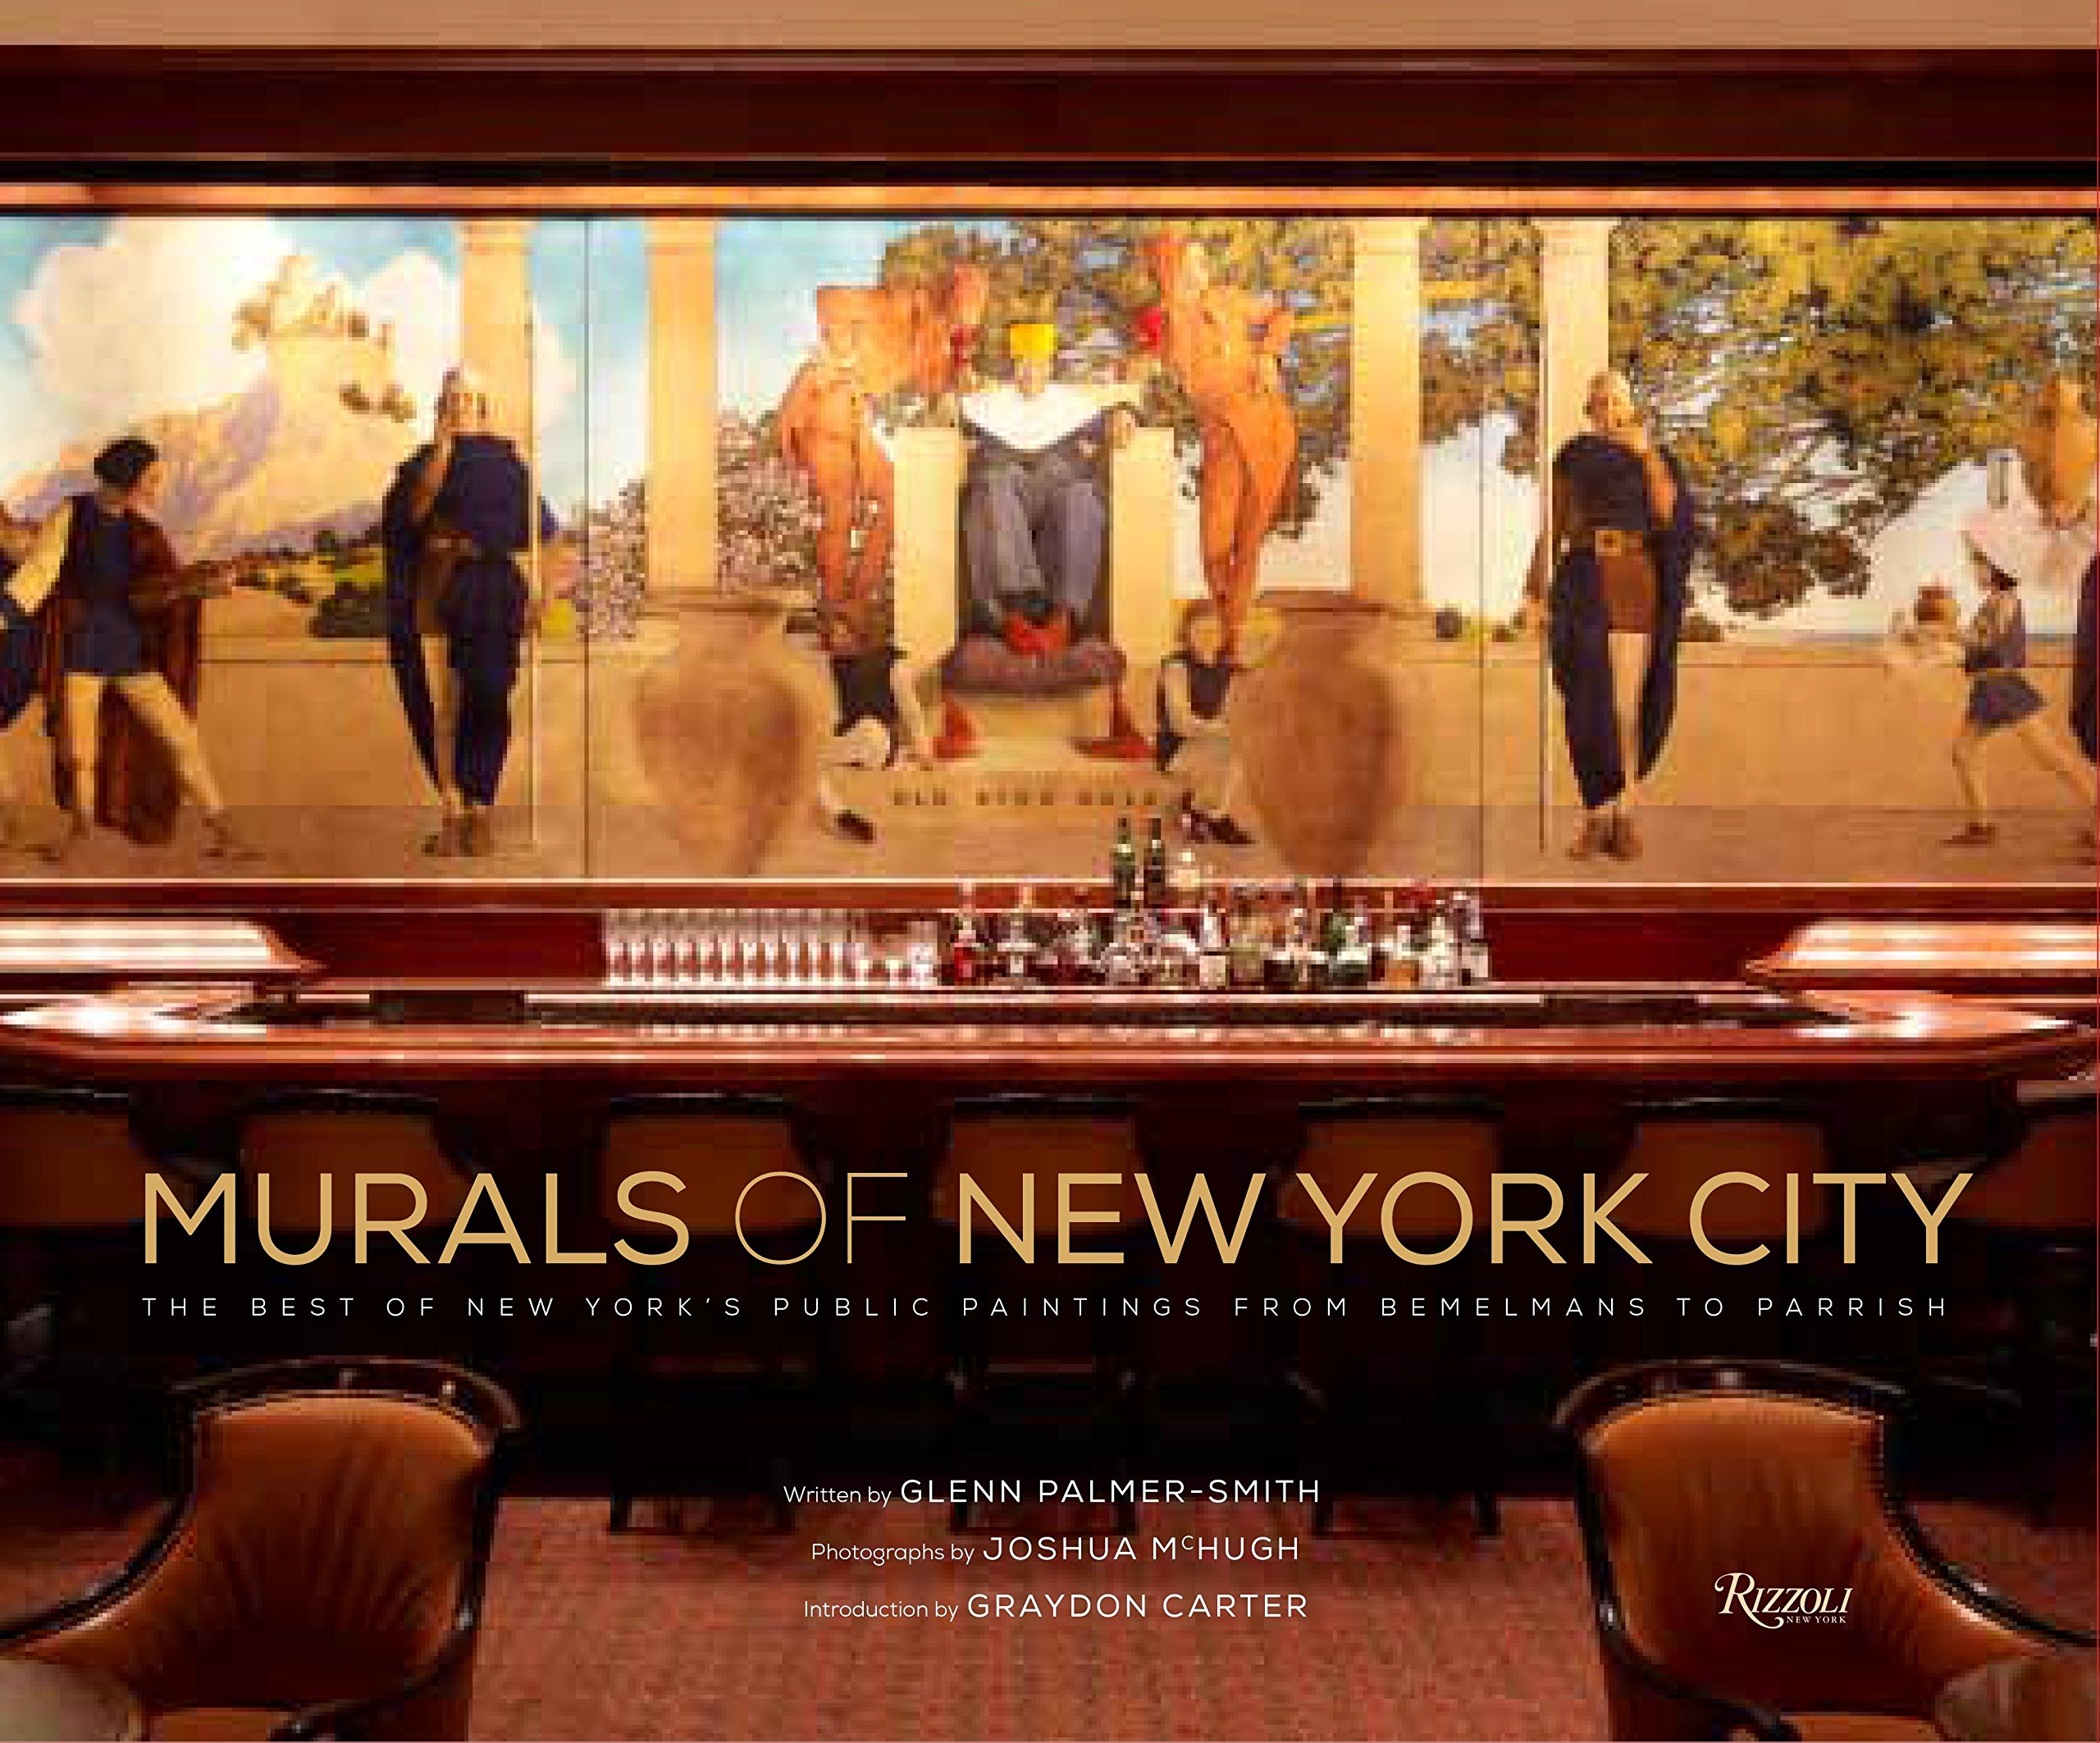 The cover of MURALS OF NEW YORK CITY: THE BEST OF NEW YORK’S PUBLIC PAINTINGS FROM BEMELMANS TO PARRISH